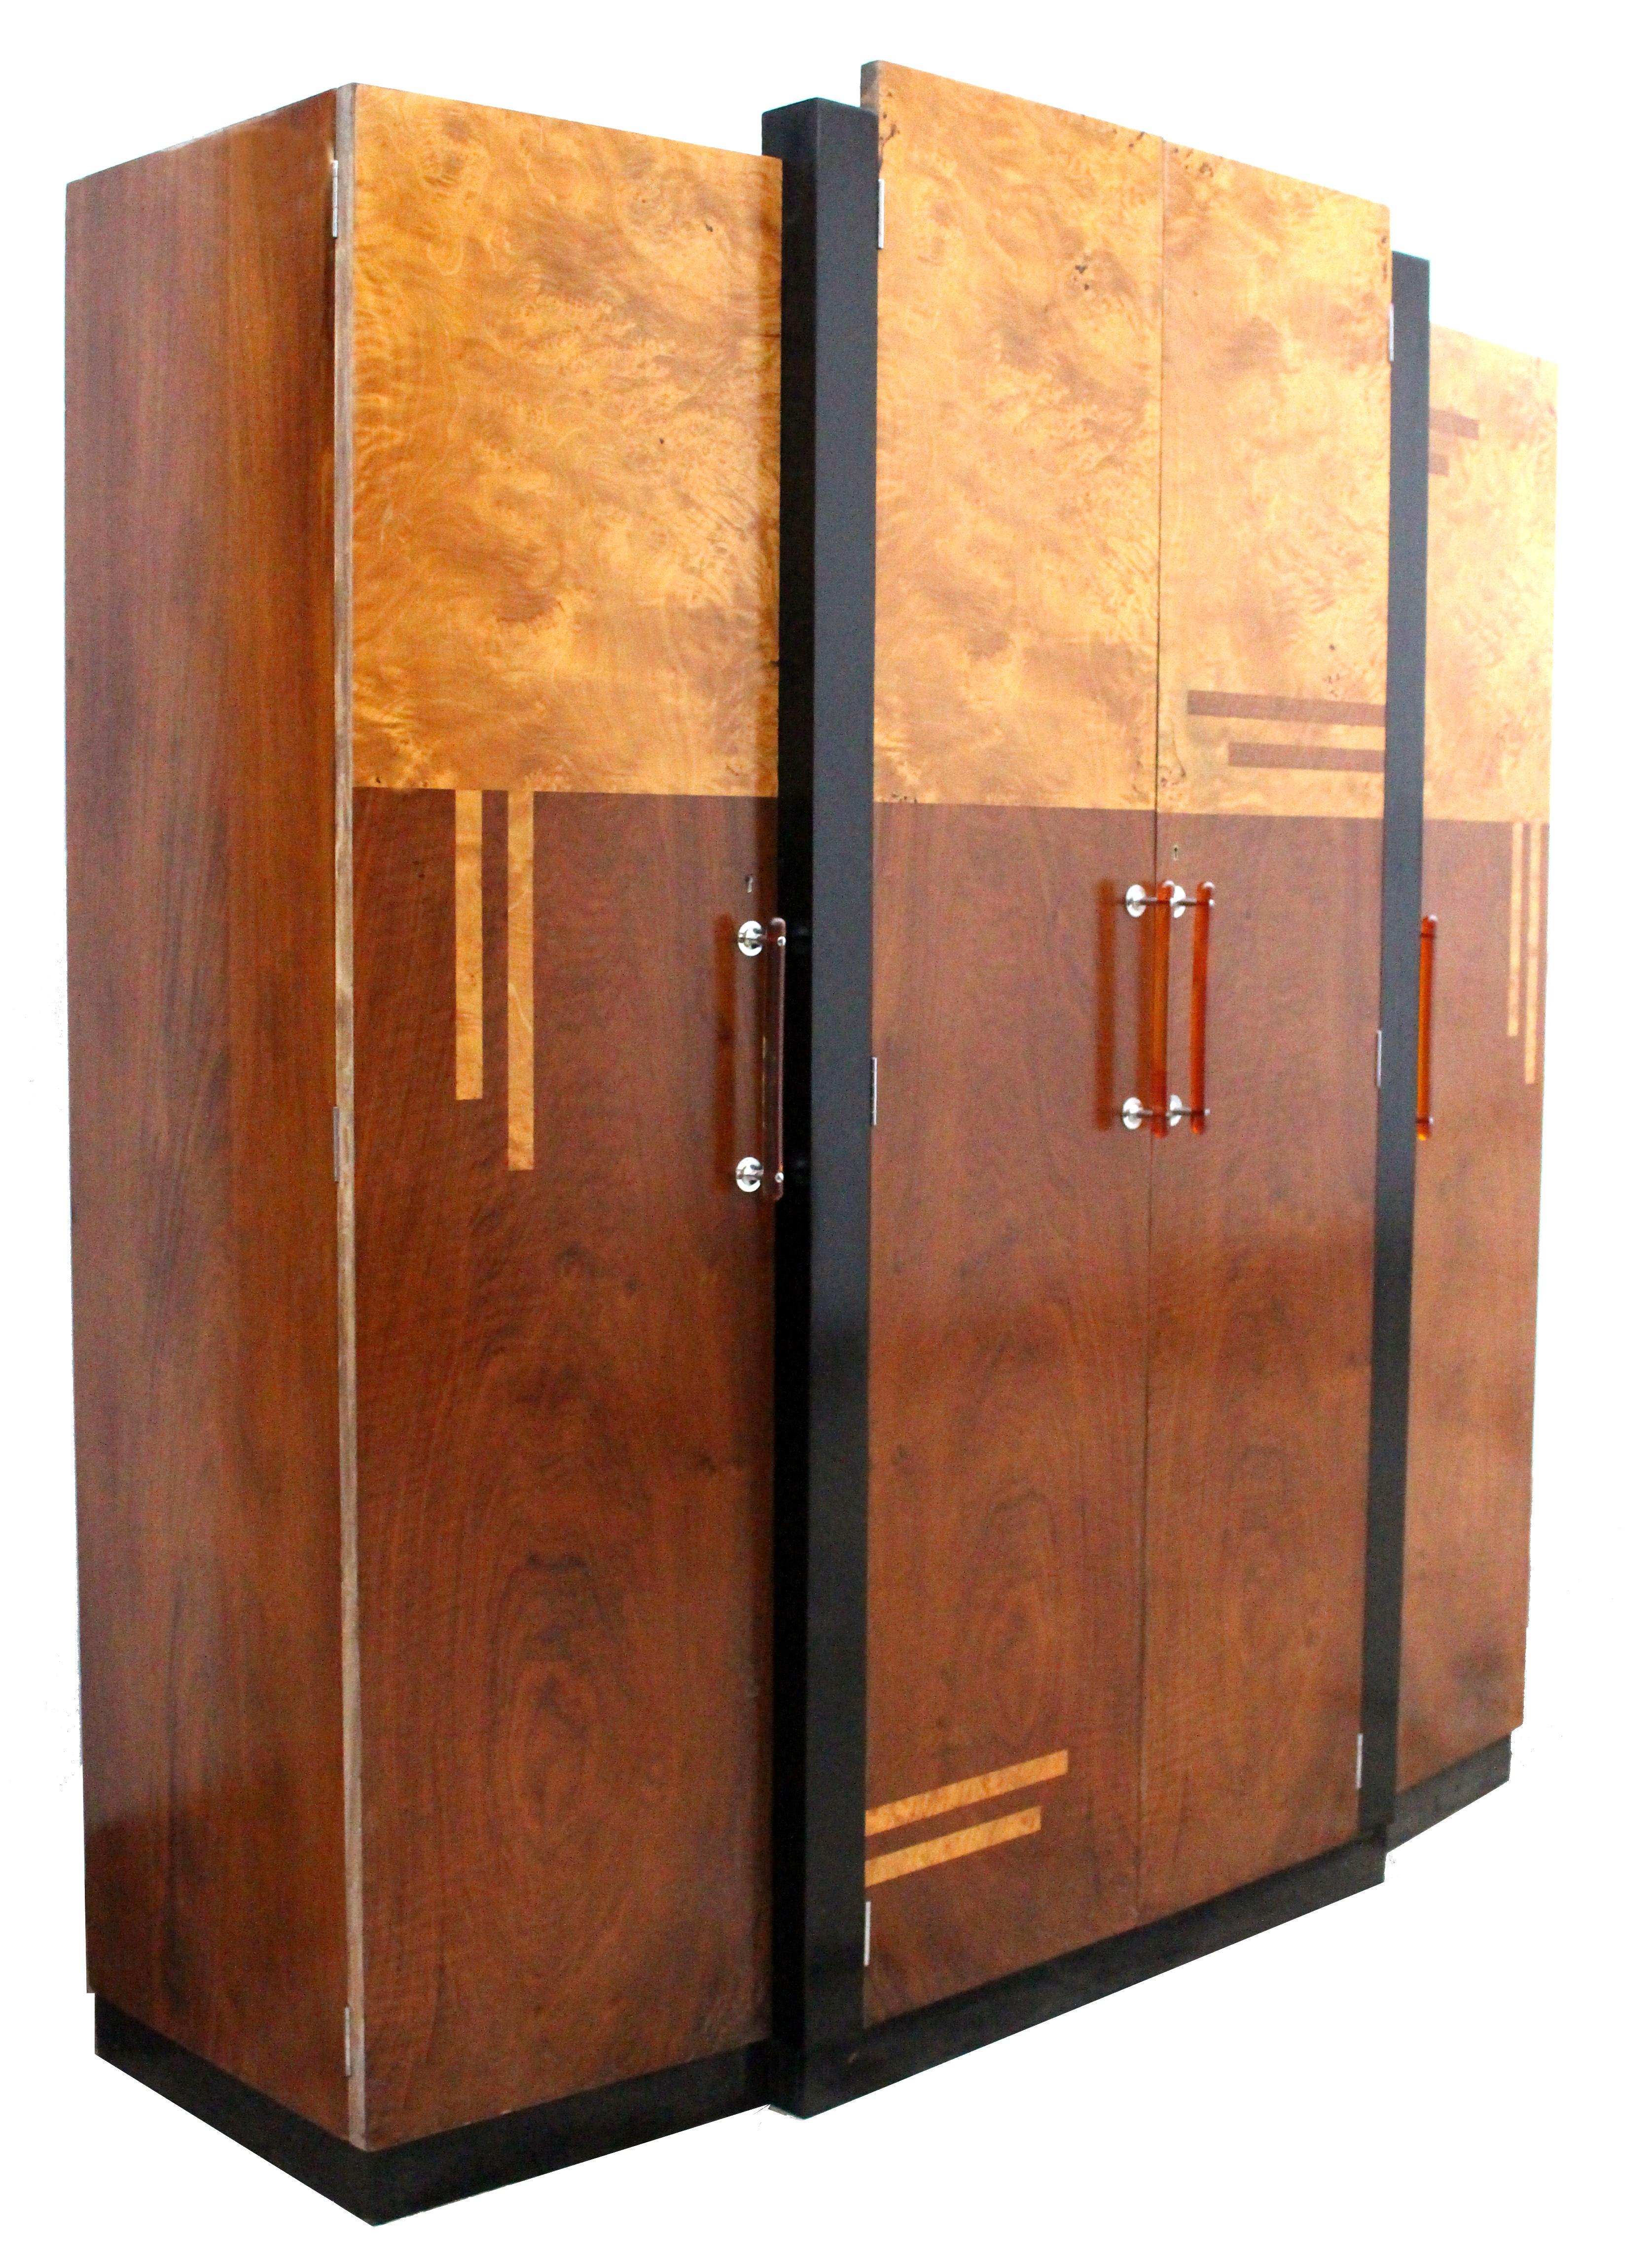 Rarely does the opportunity come along to acquire a truly iconically designed piece that represents it's era so well as this superb Art Deco three door triple wardrobe. Dating to the 1930's the quality throughout this piece is of the highest spec